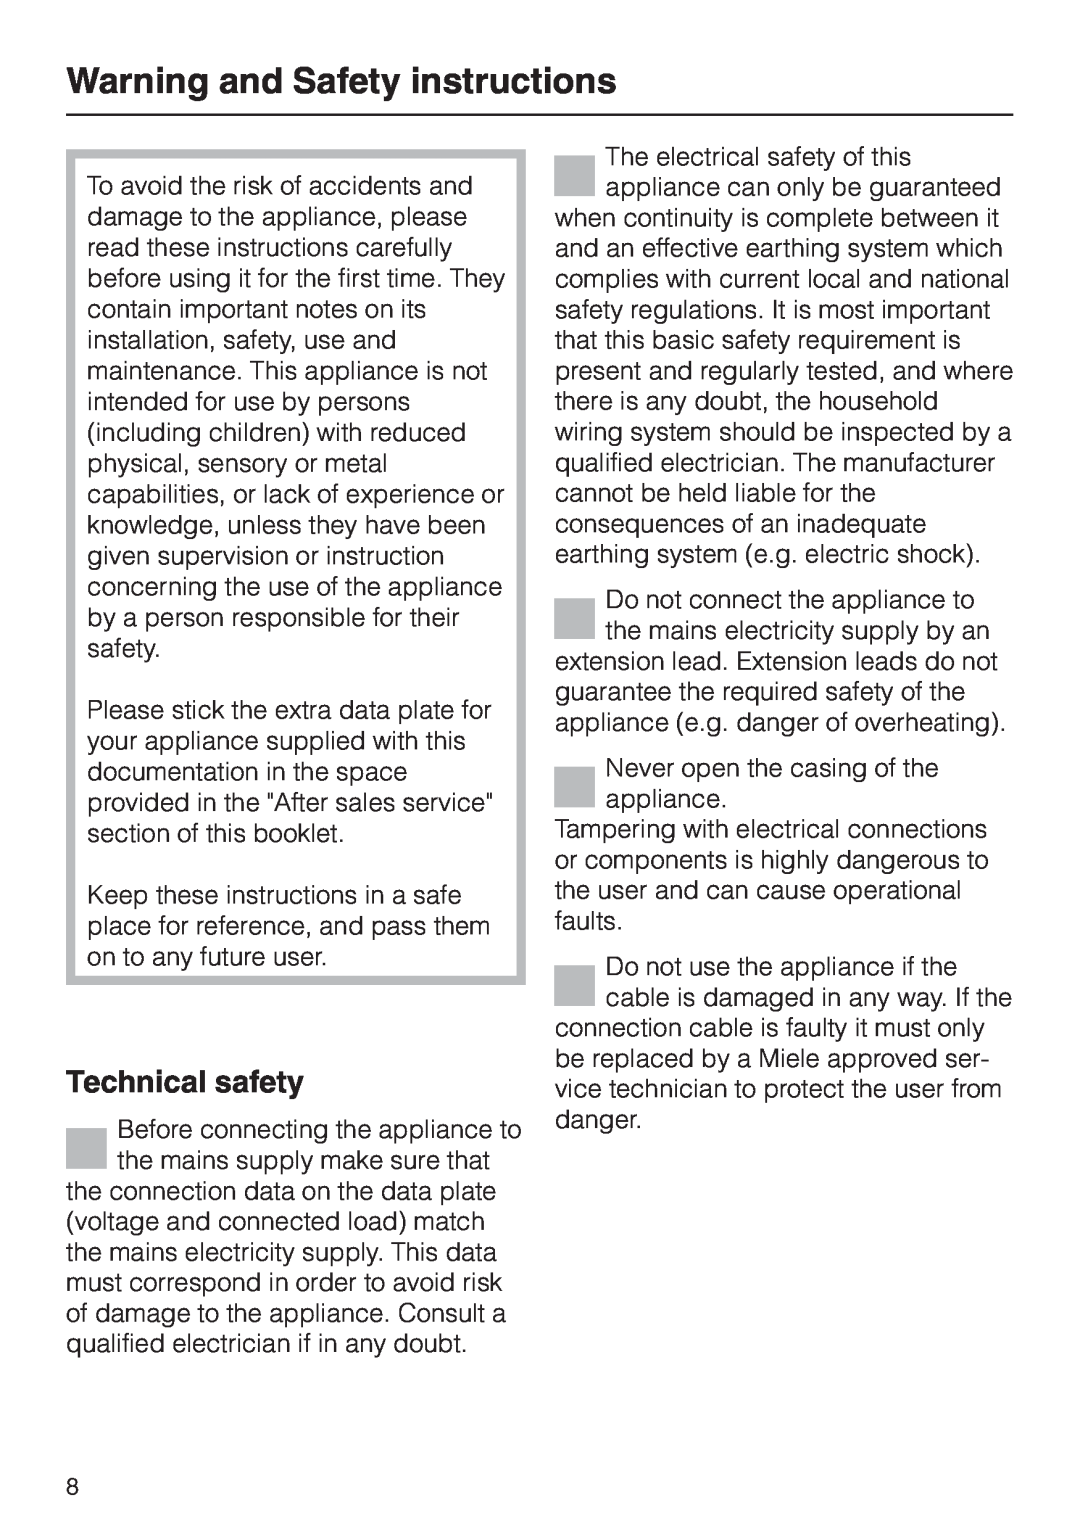 Miele DG 1050 manual Warning and Safety instructions, Technical safety 